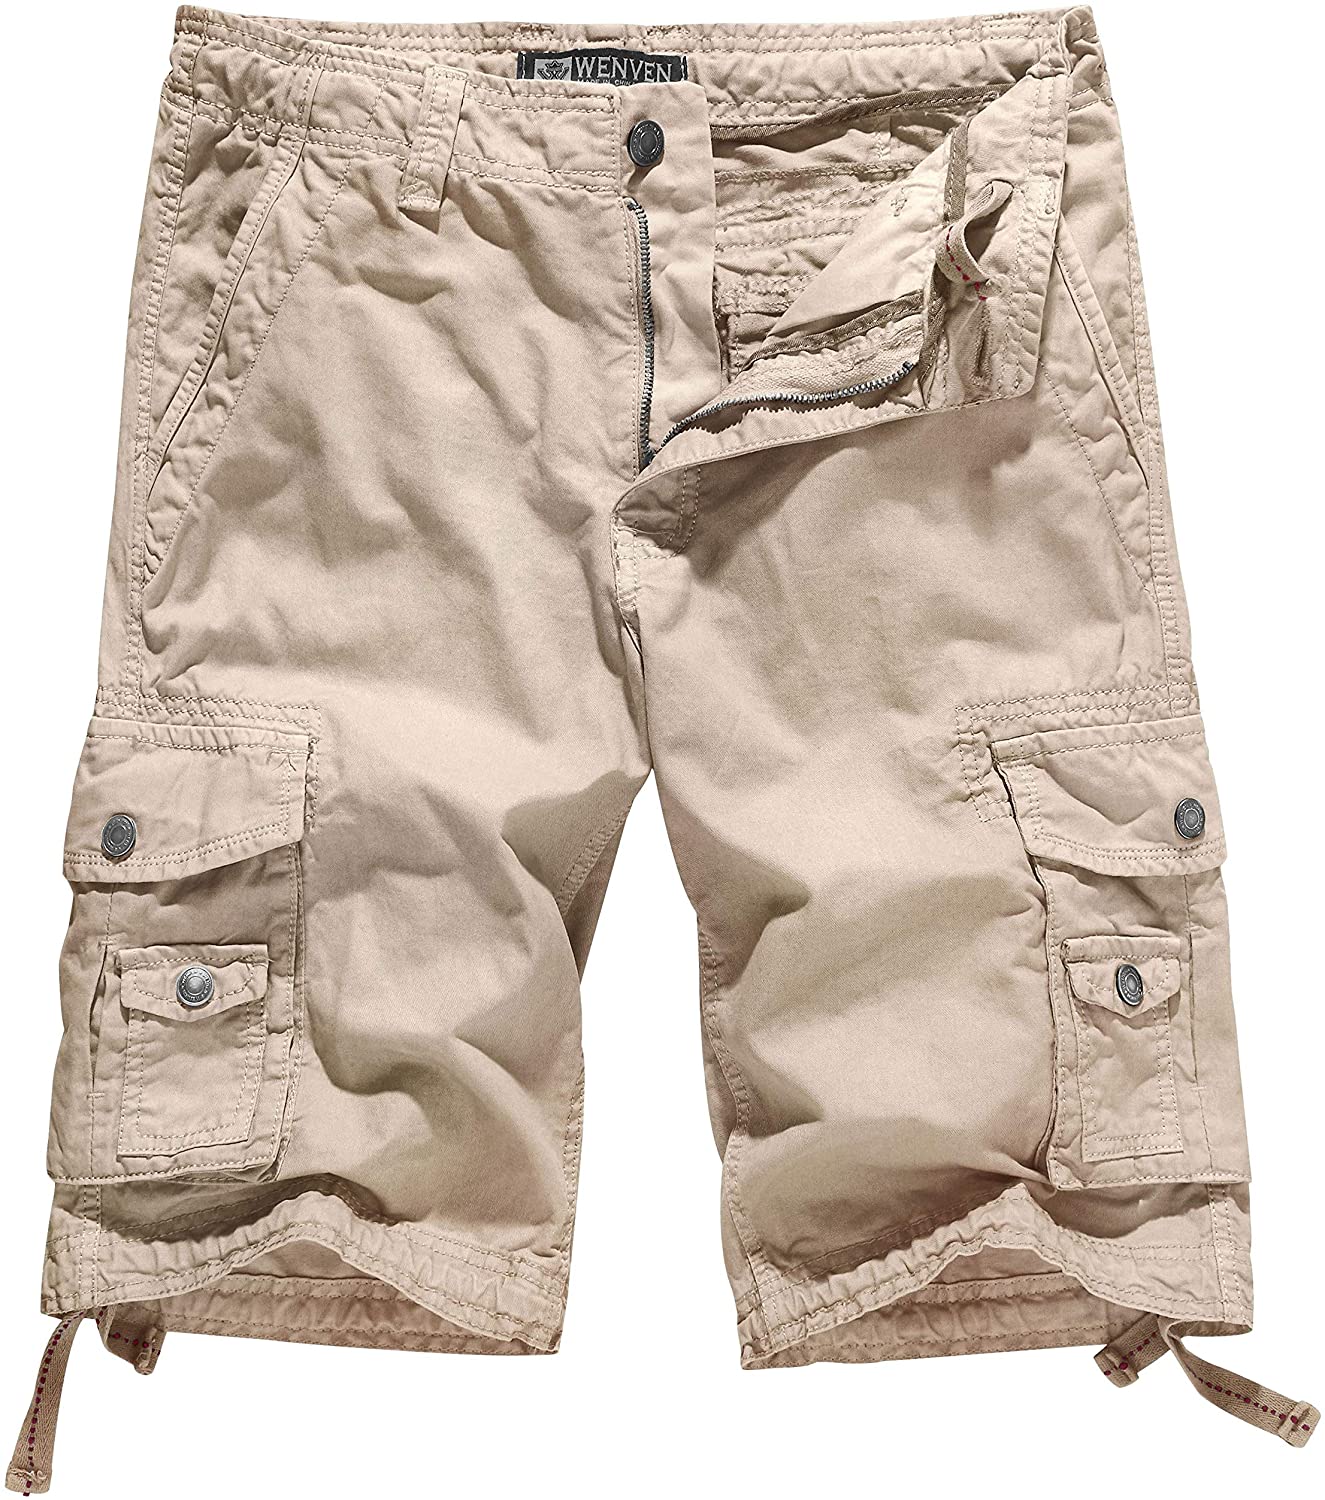 WenVen Men's Cotton Twill Cargo Shorts Classic Relaxed Fit Reg and Big & Tall Sizes 